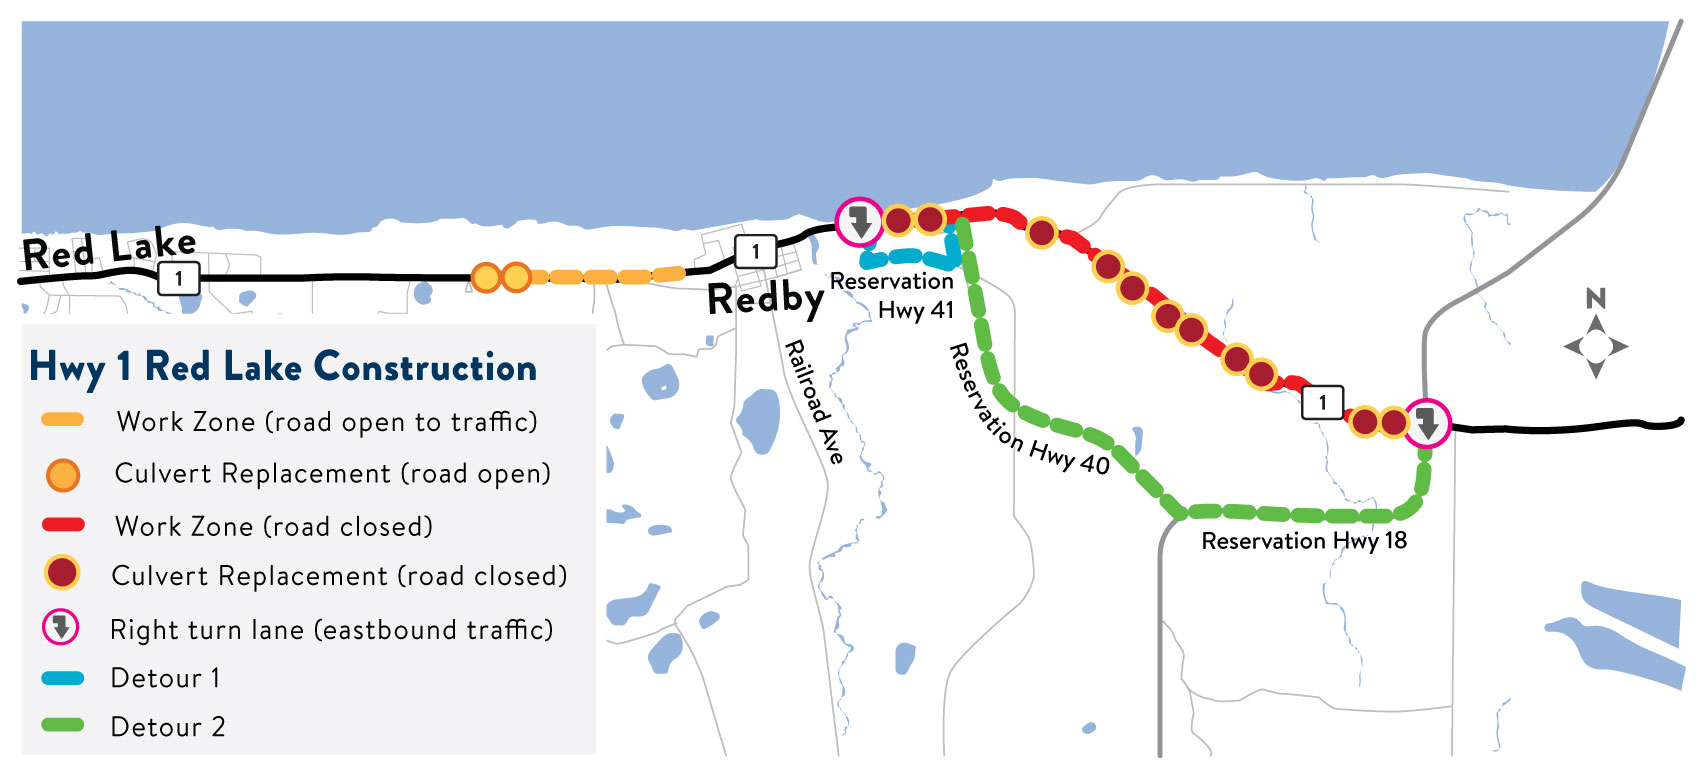 Highway 1 Redby Project Map